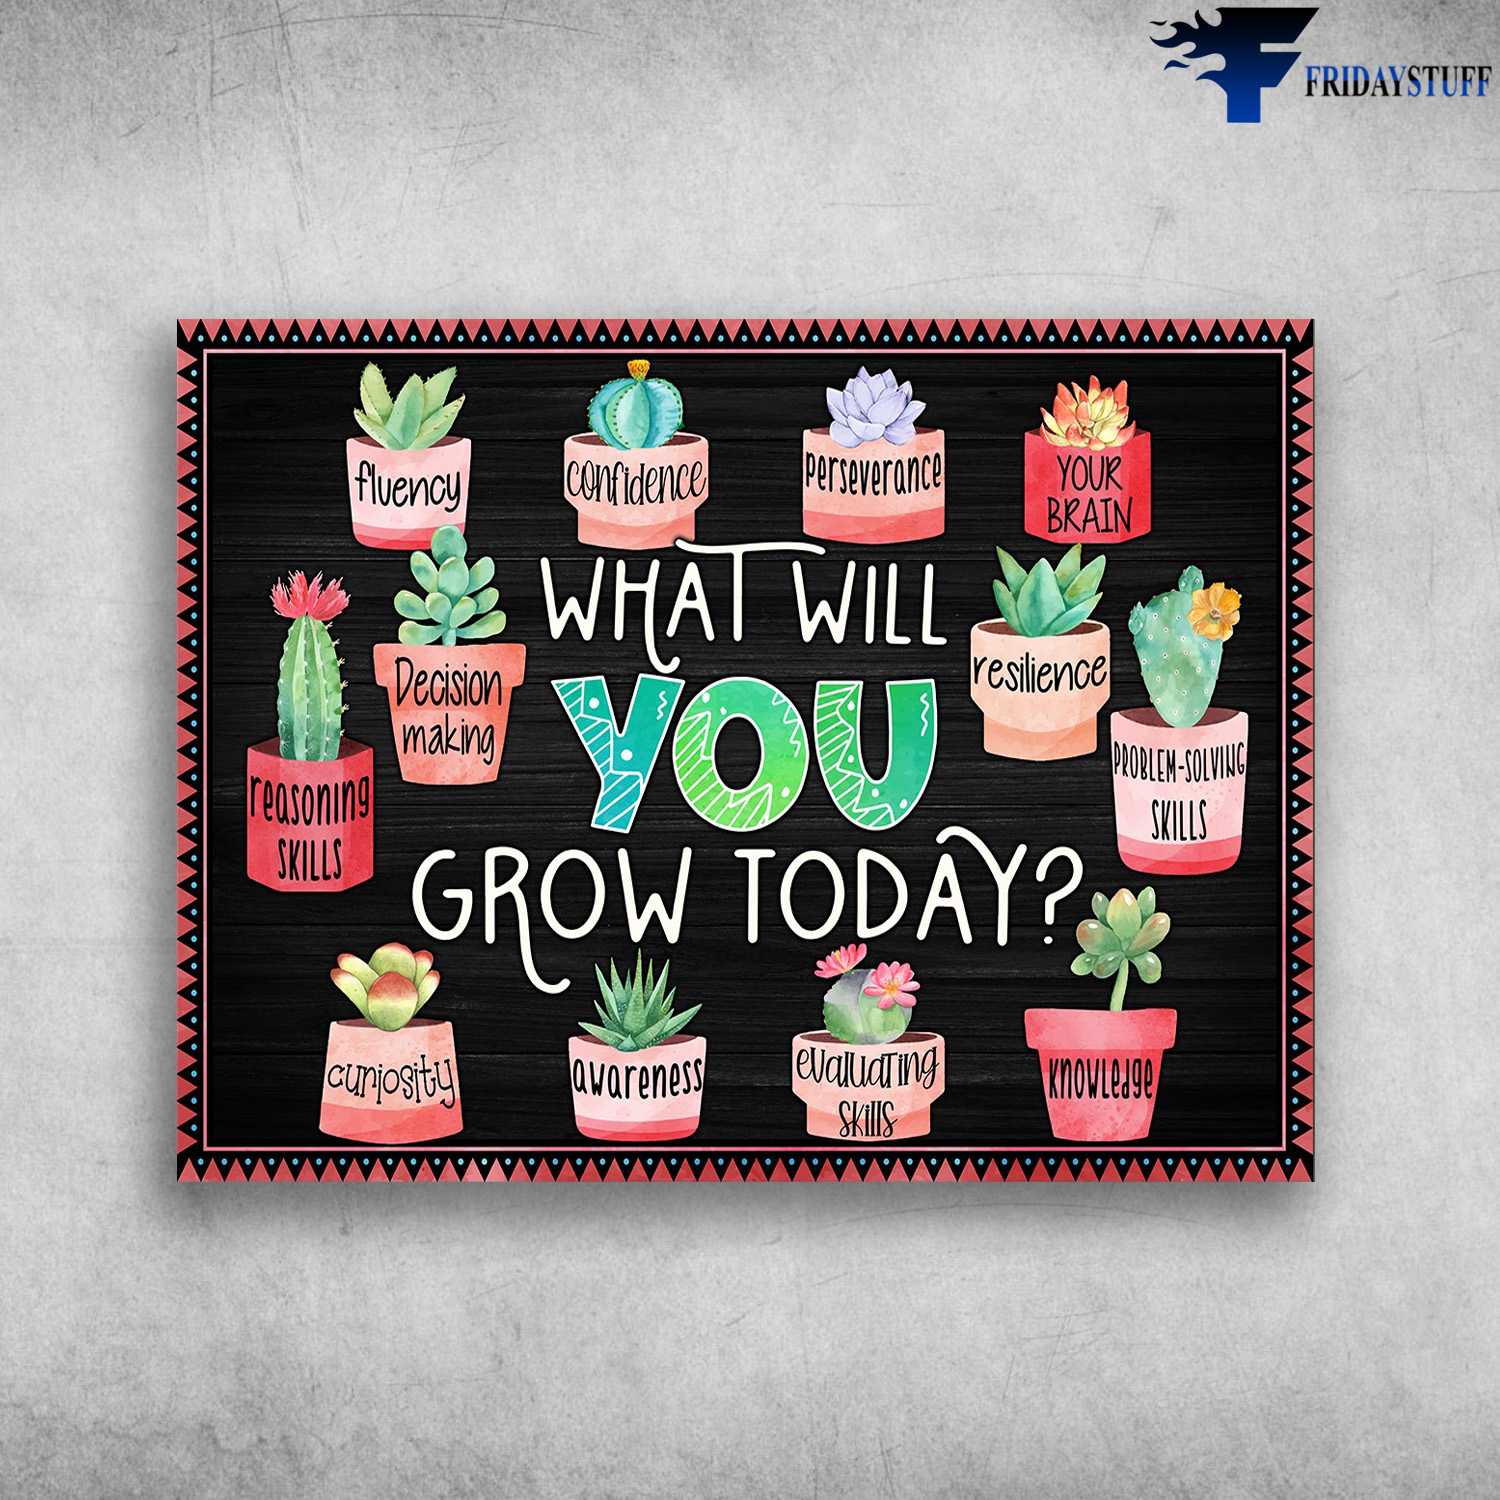 Wall Art Poster, What Will You Grow Today, Fluency, Confidence, Perseverance, Your Brain, Decision Making